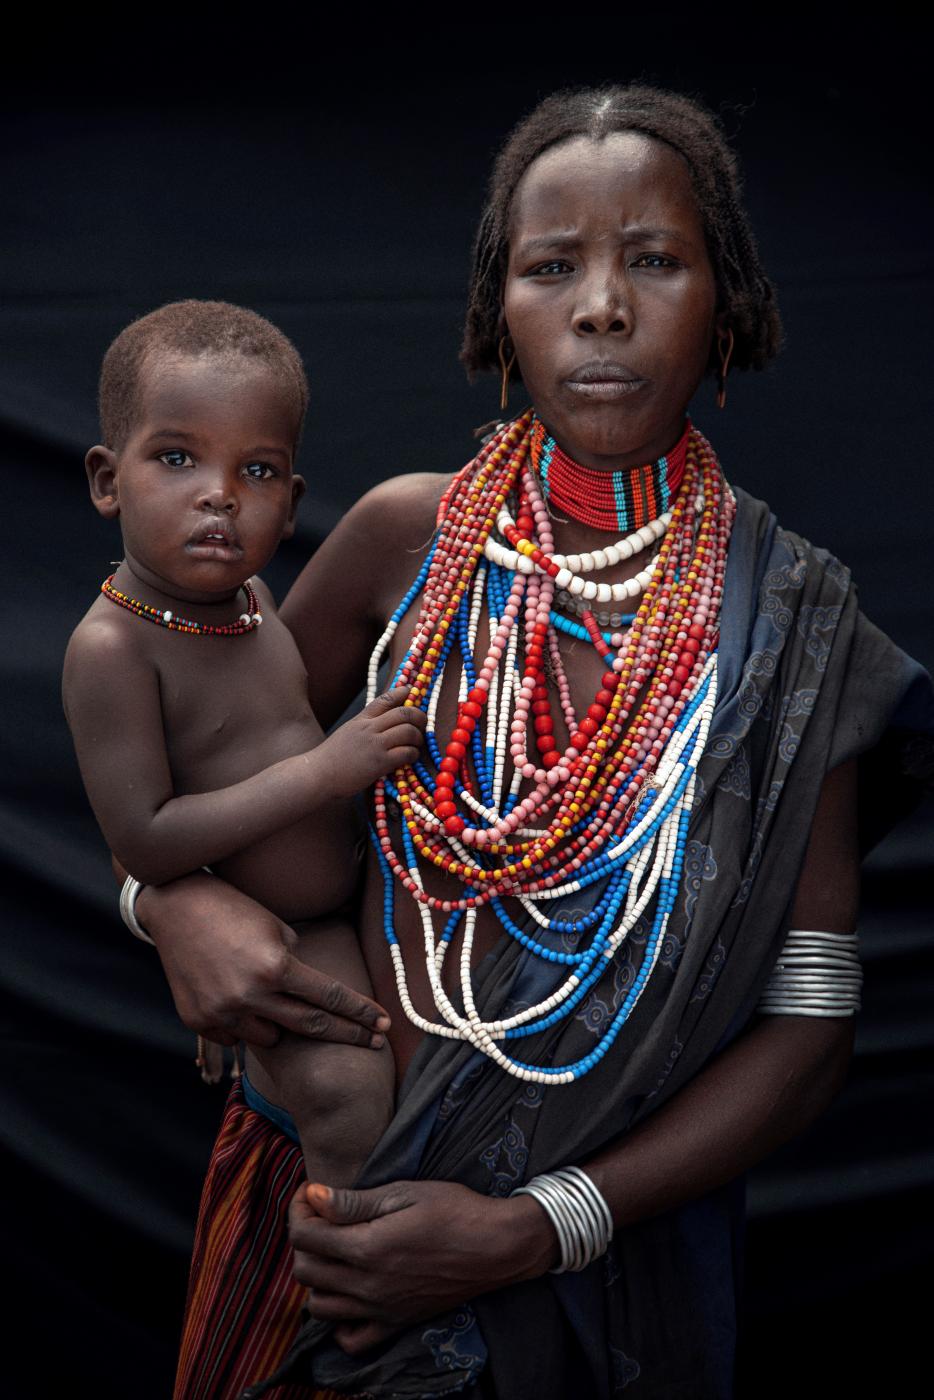 Arbore Mother and child | Buy this image